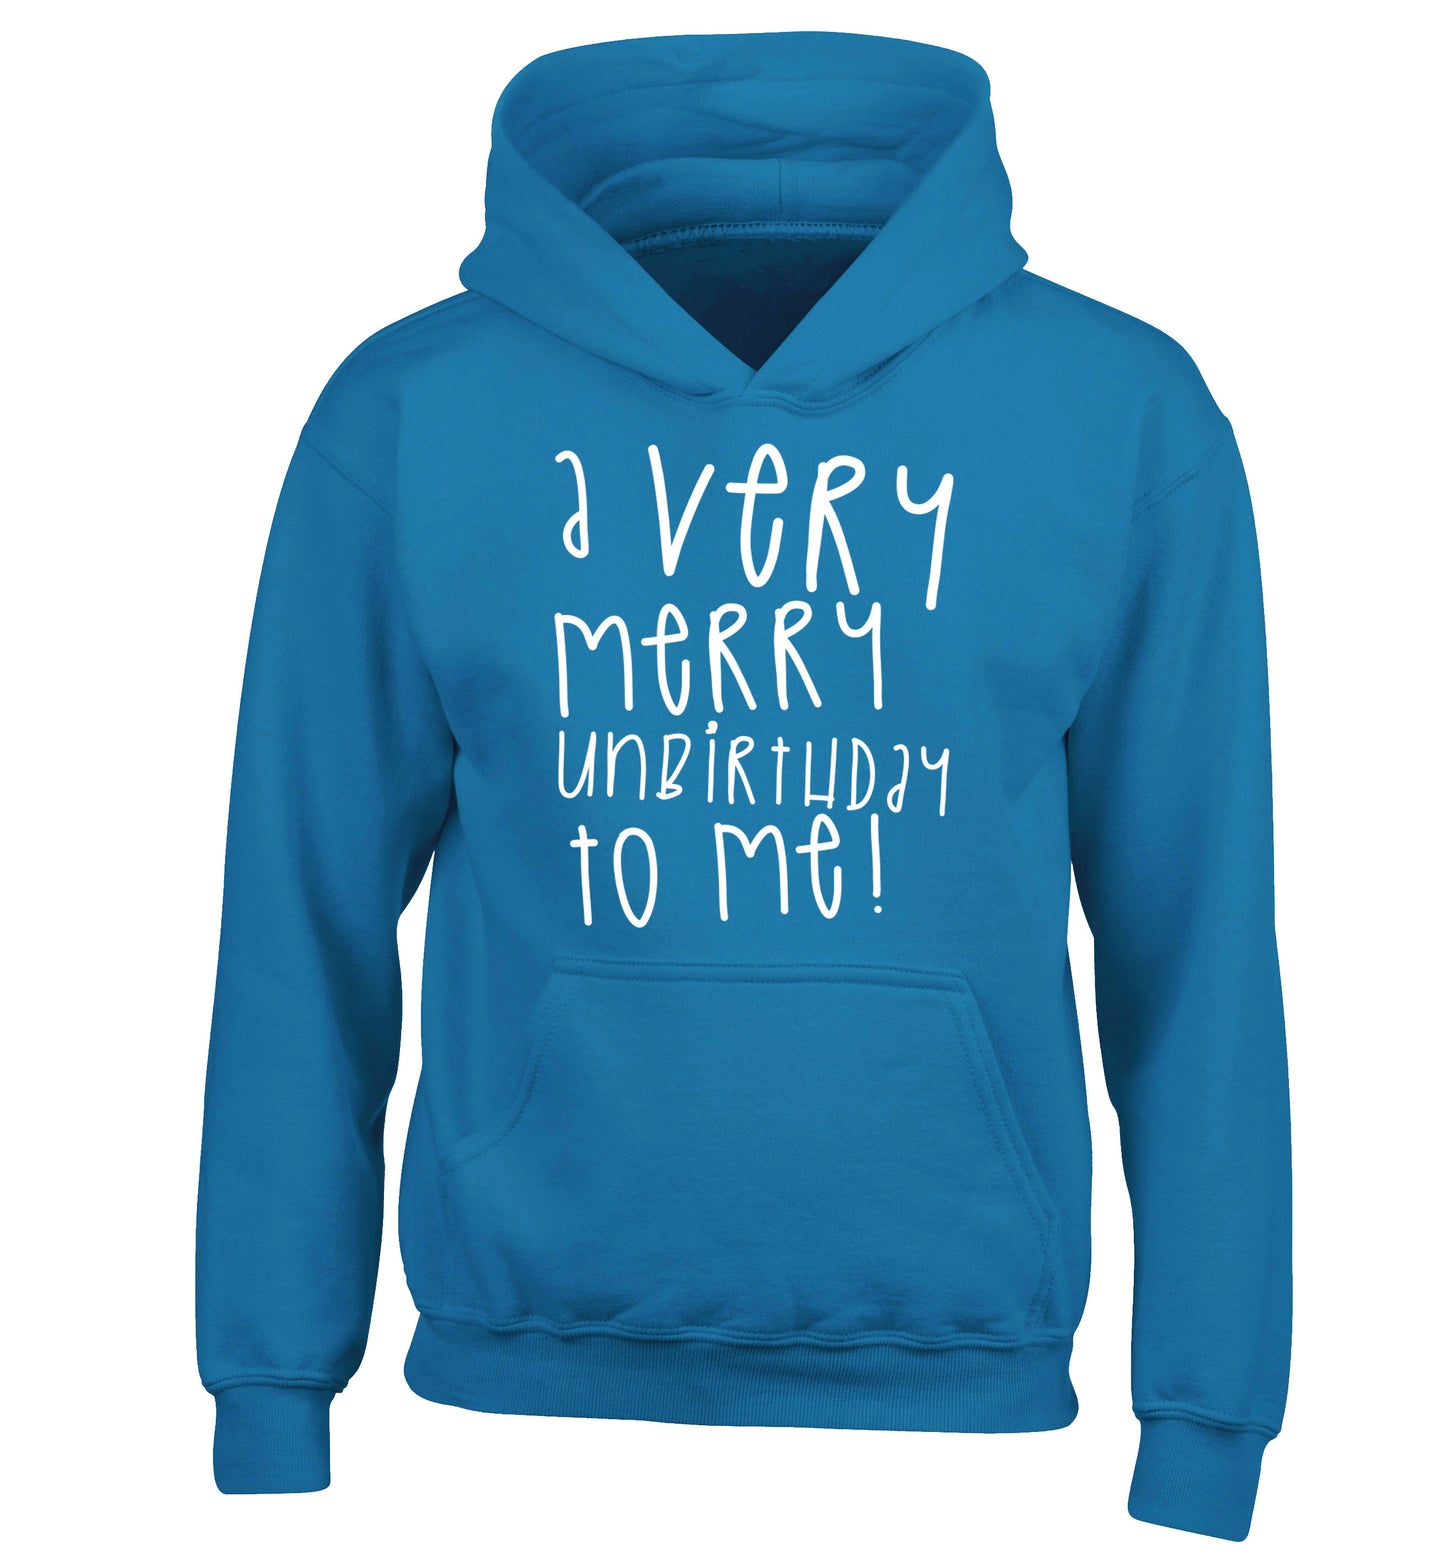 A very merry unbirthday to me! children's blue hoodie 12-14 Years